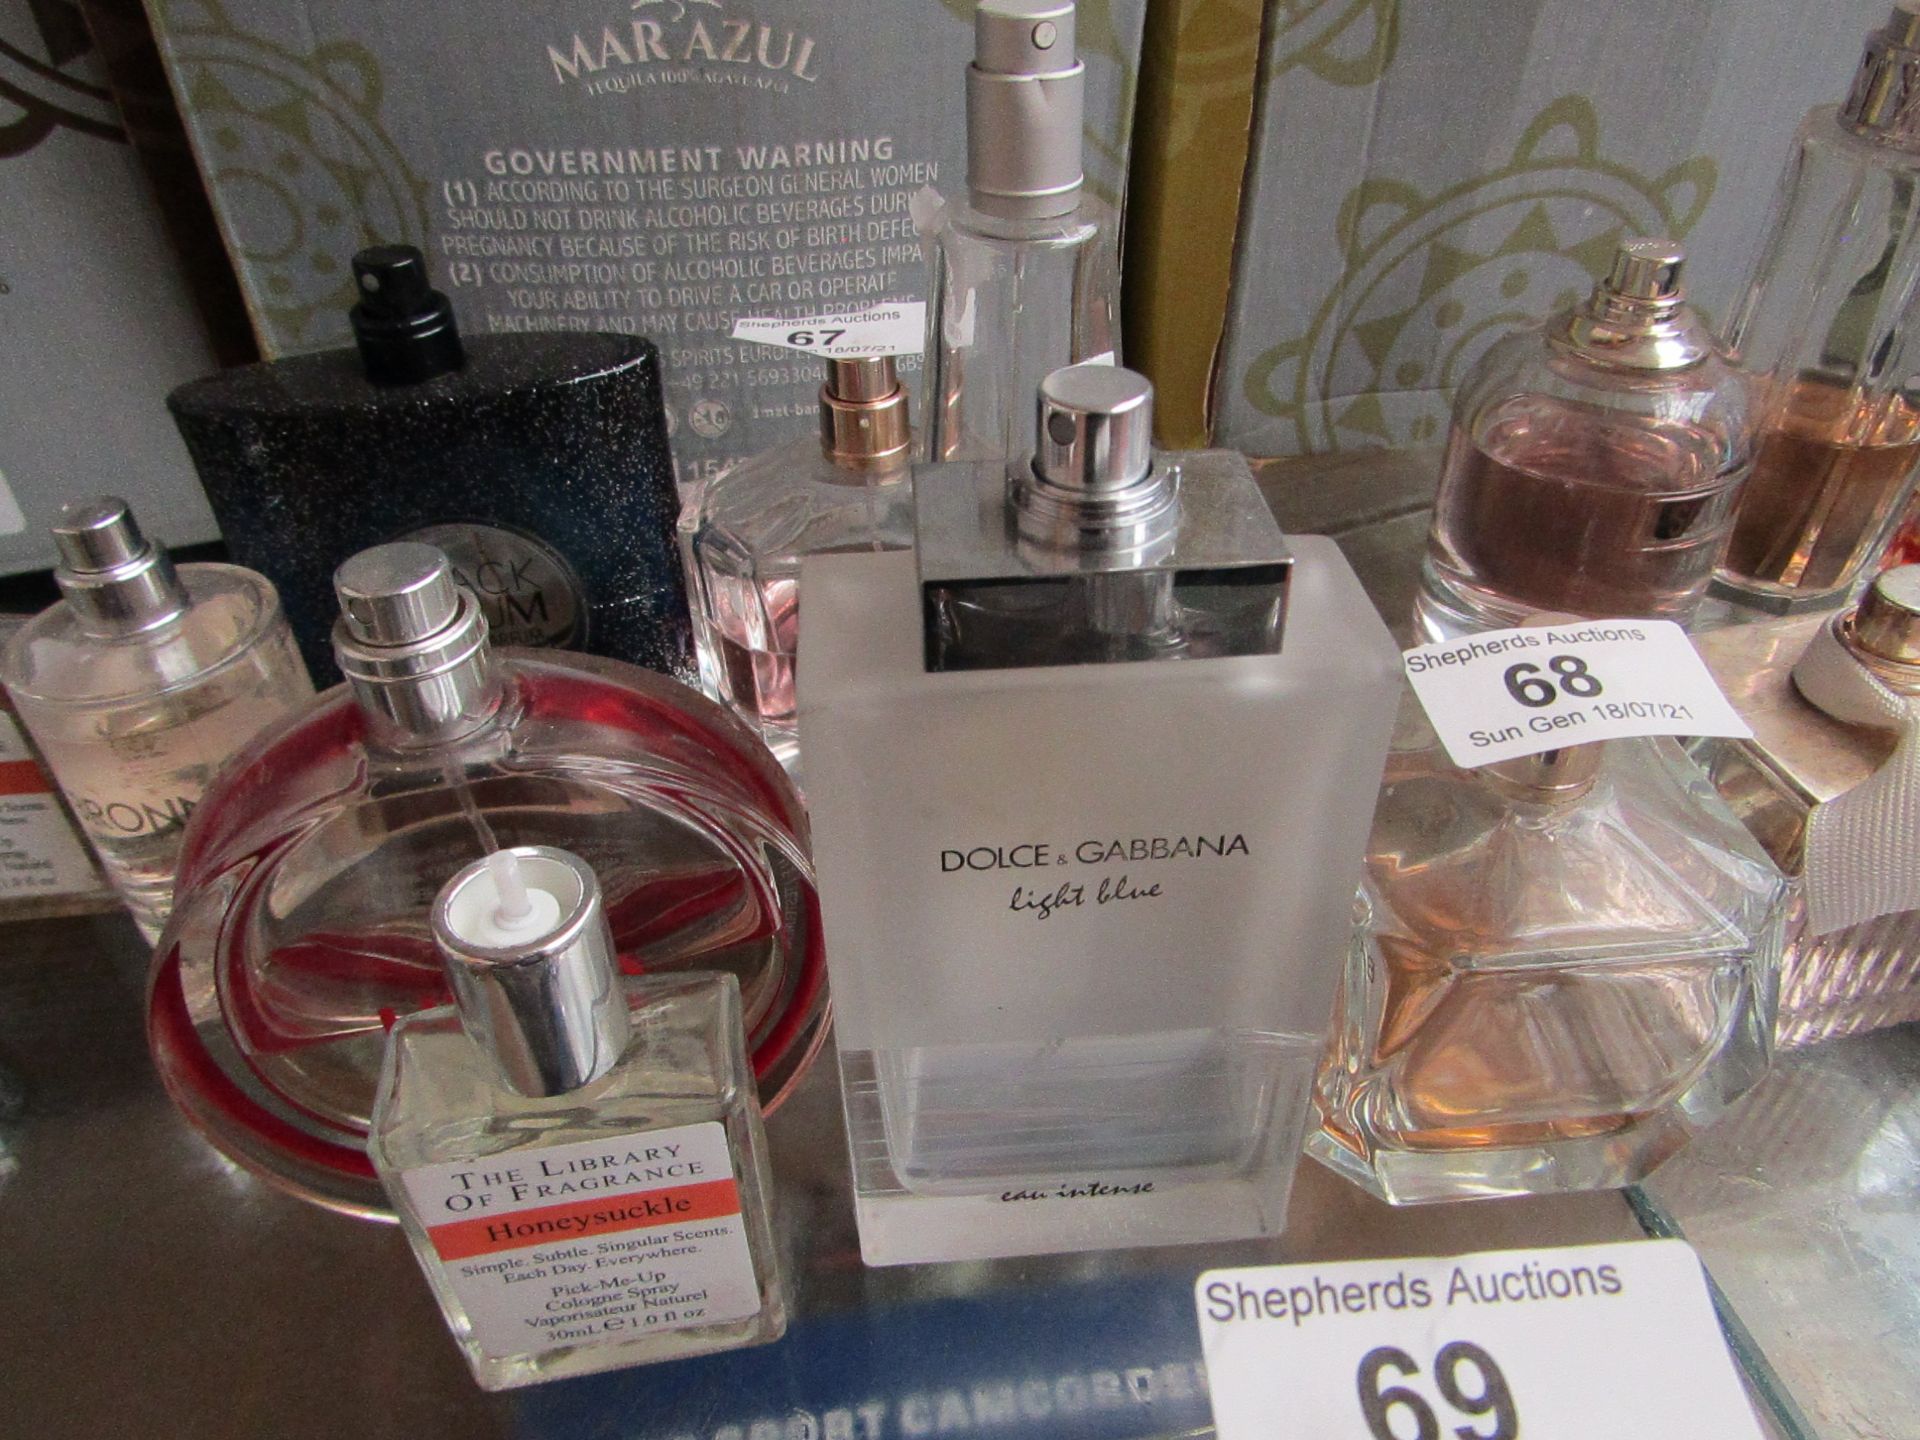 5x various aftershave/perfume, all 40% or lower, see image for style.